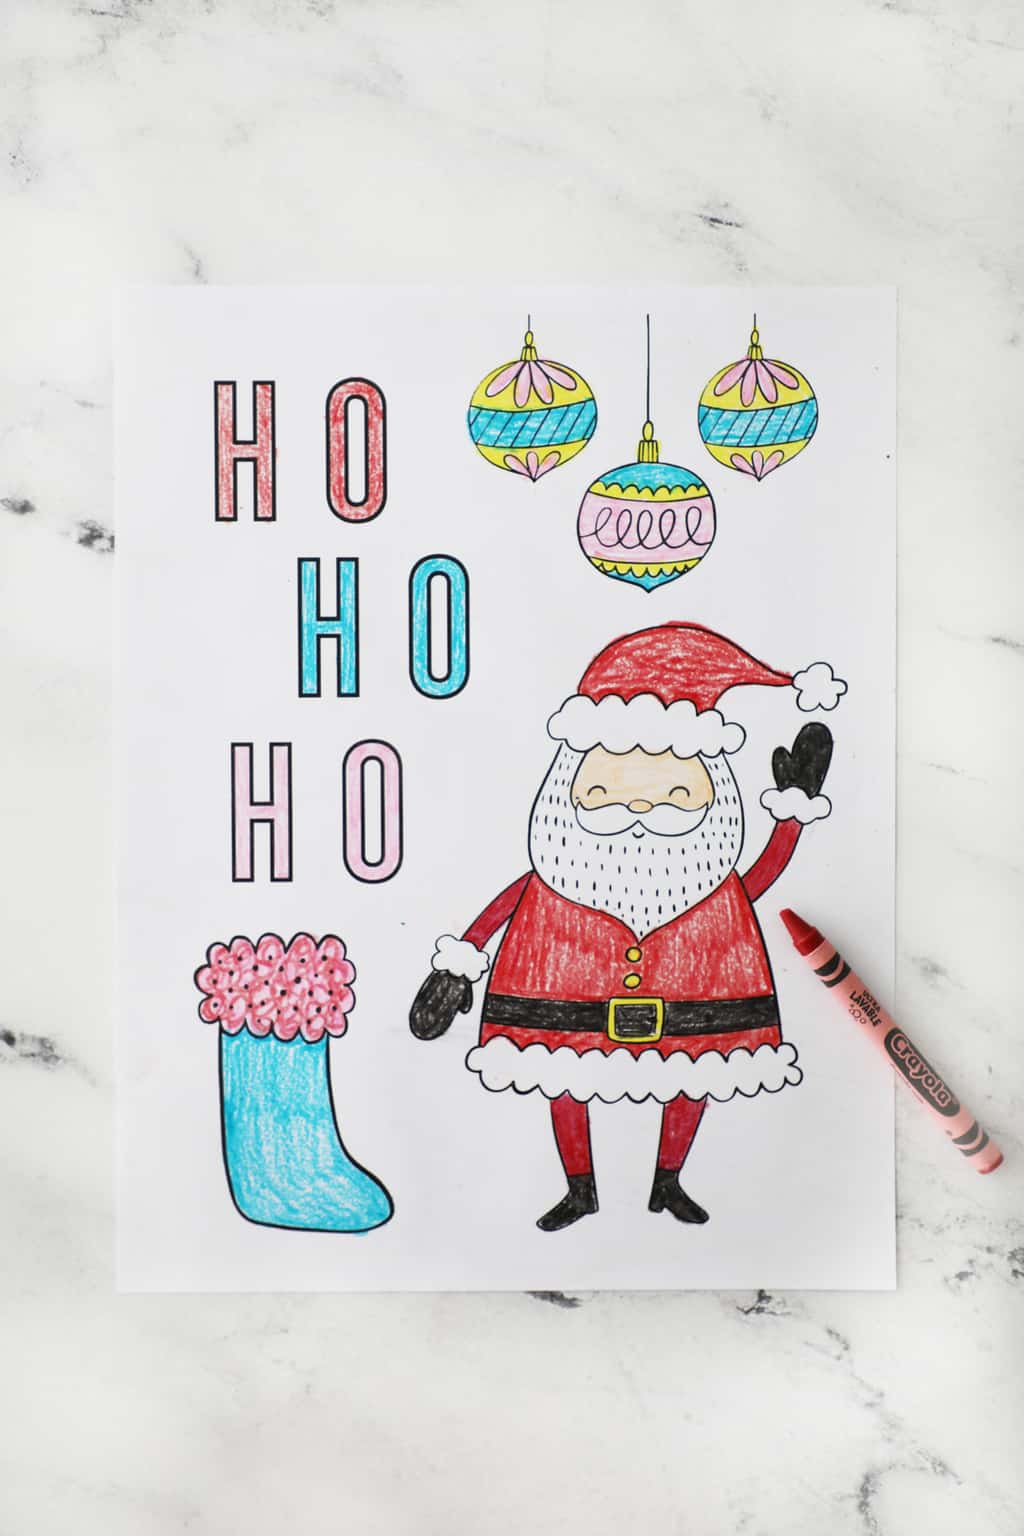 santa coloring page with the words "ho ho ho" and a stocking